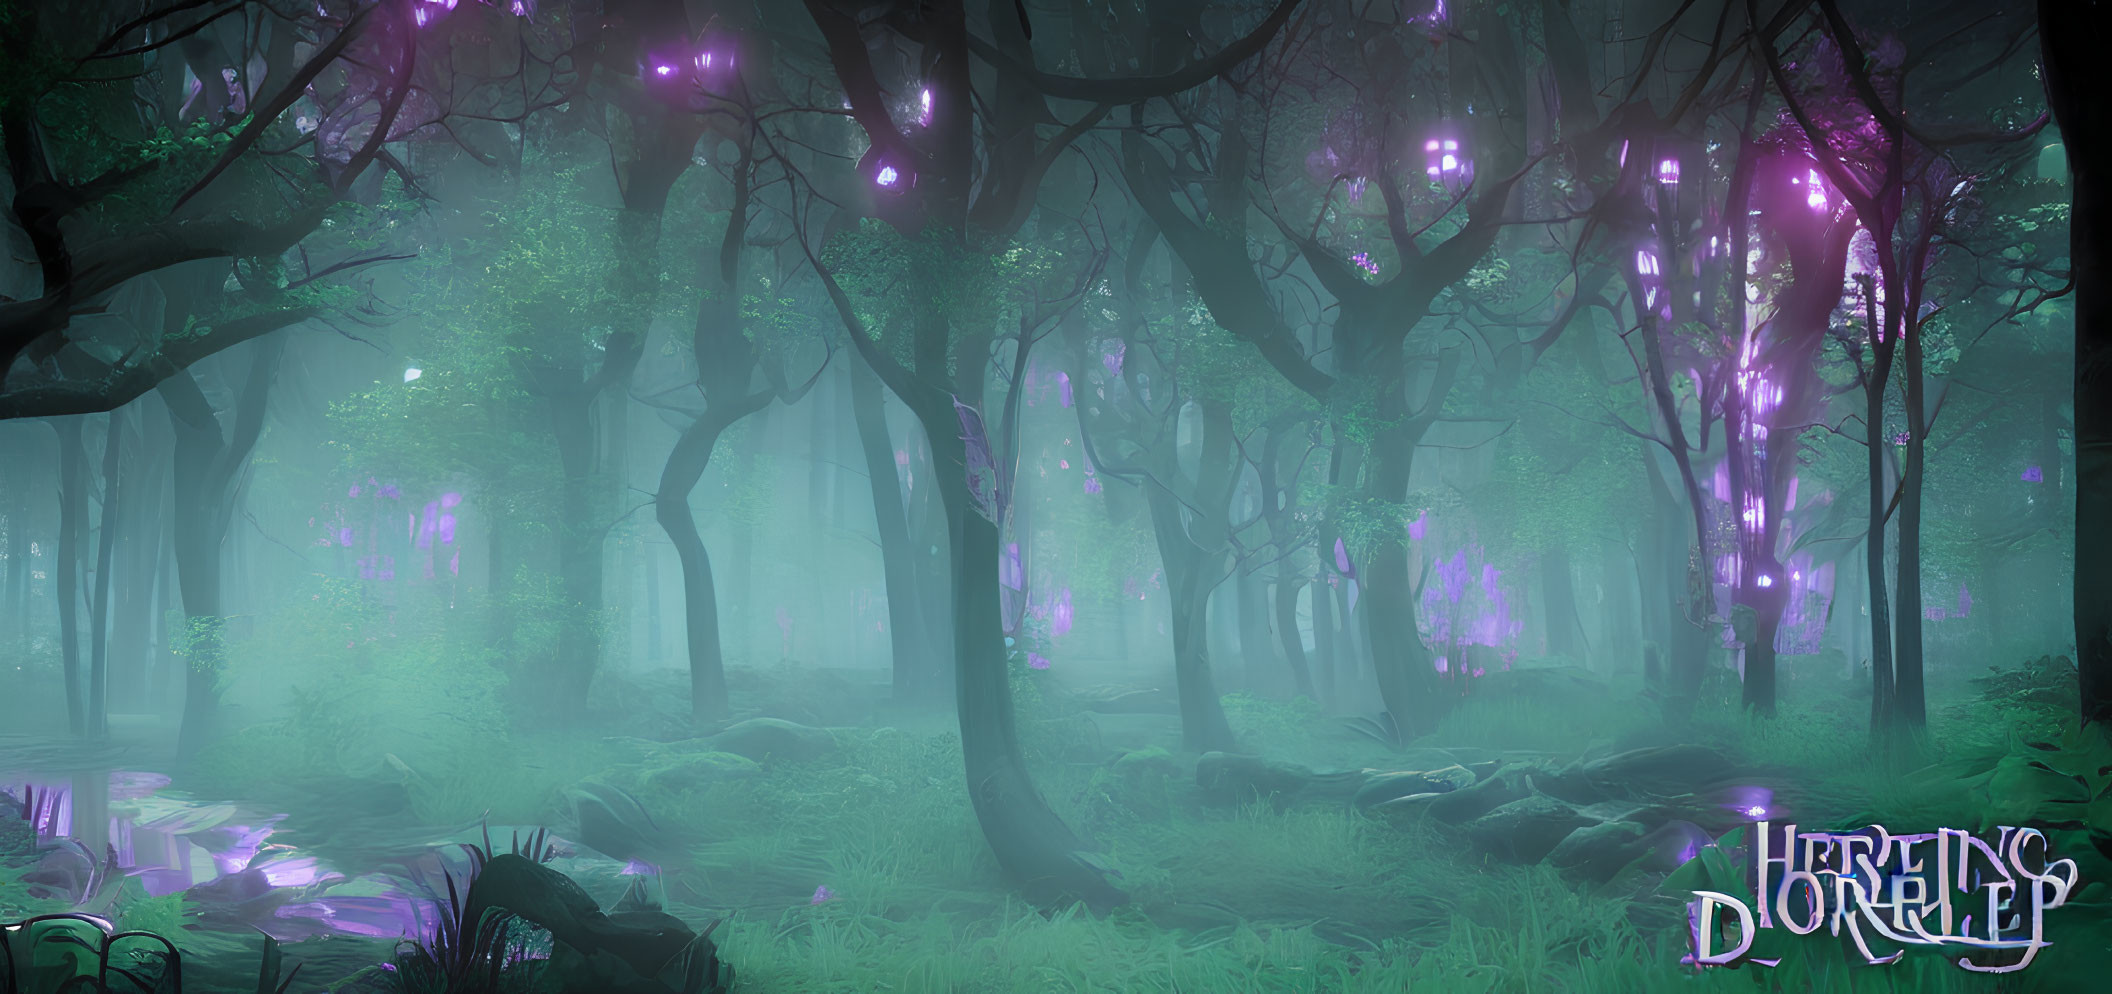 Ethereal purple lights in misty forest with "Heretic Operative" logo